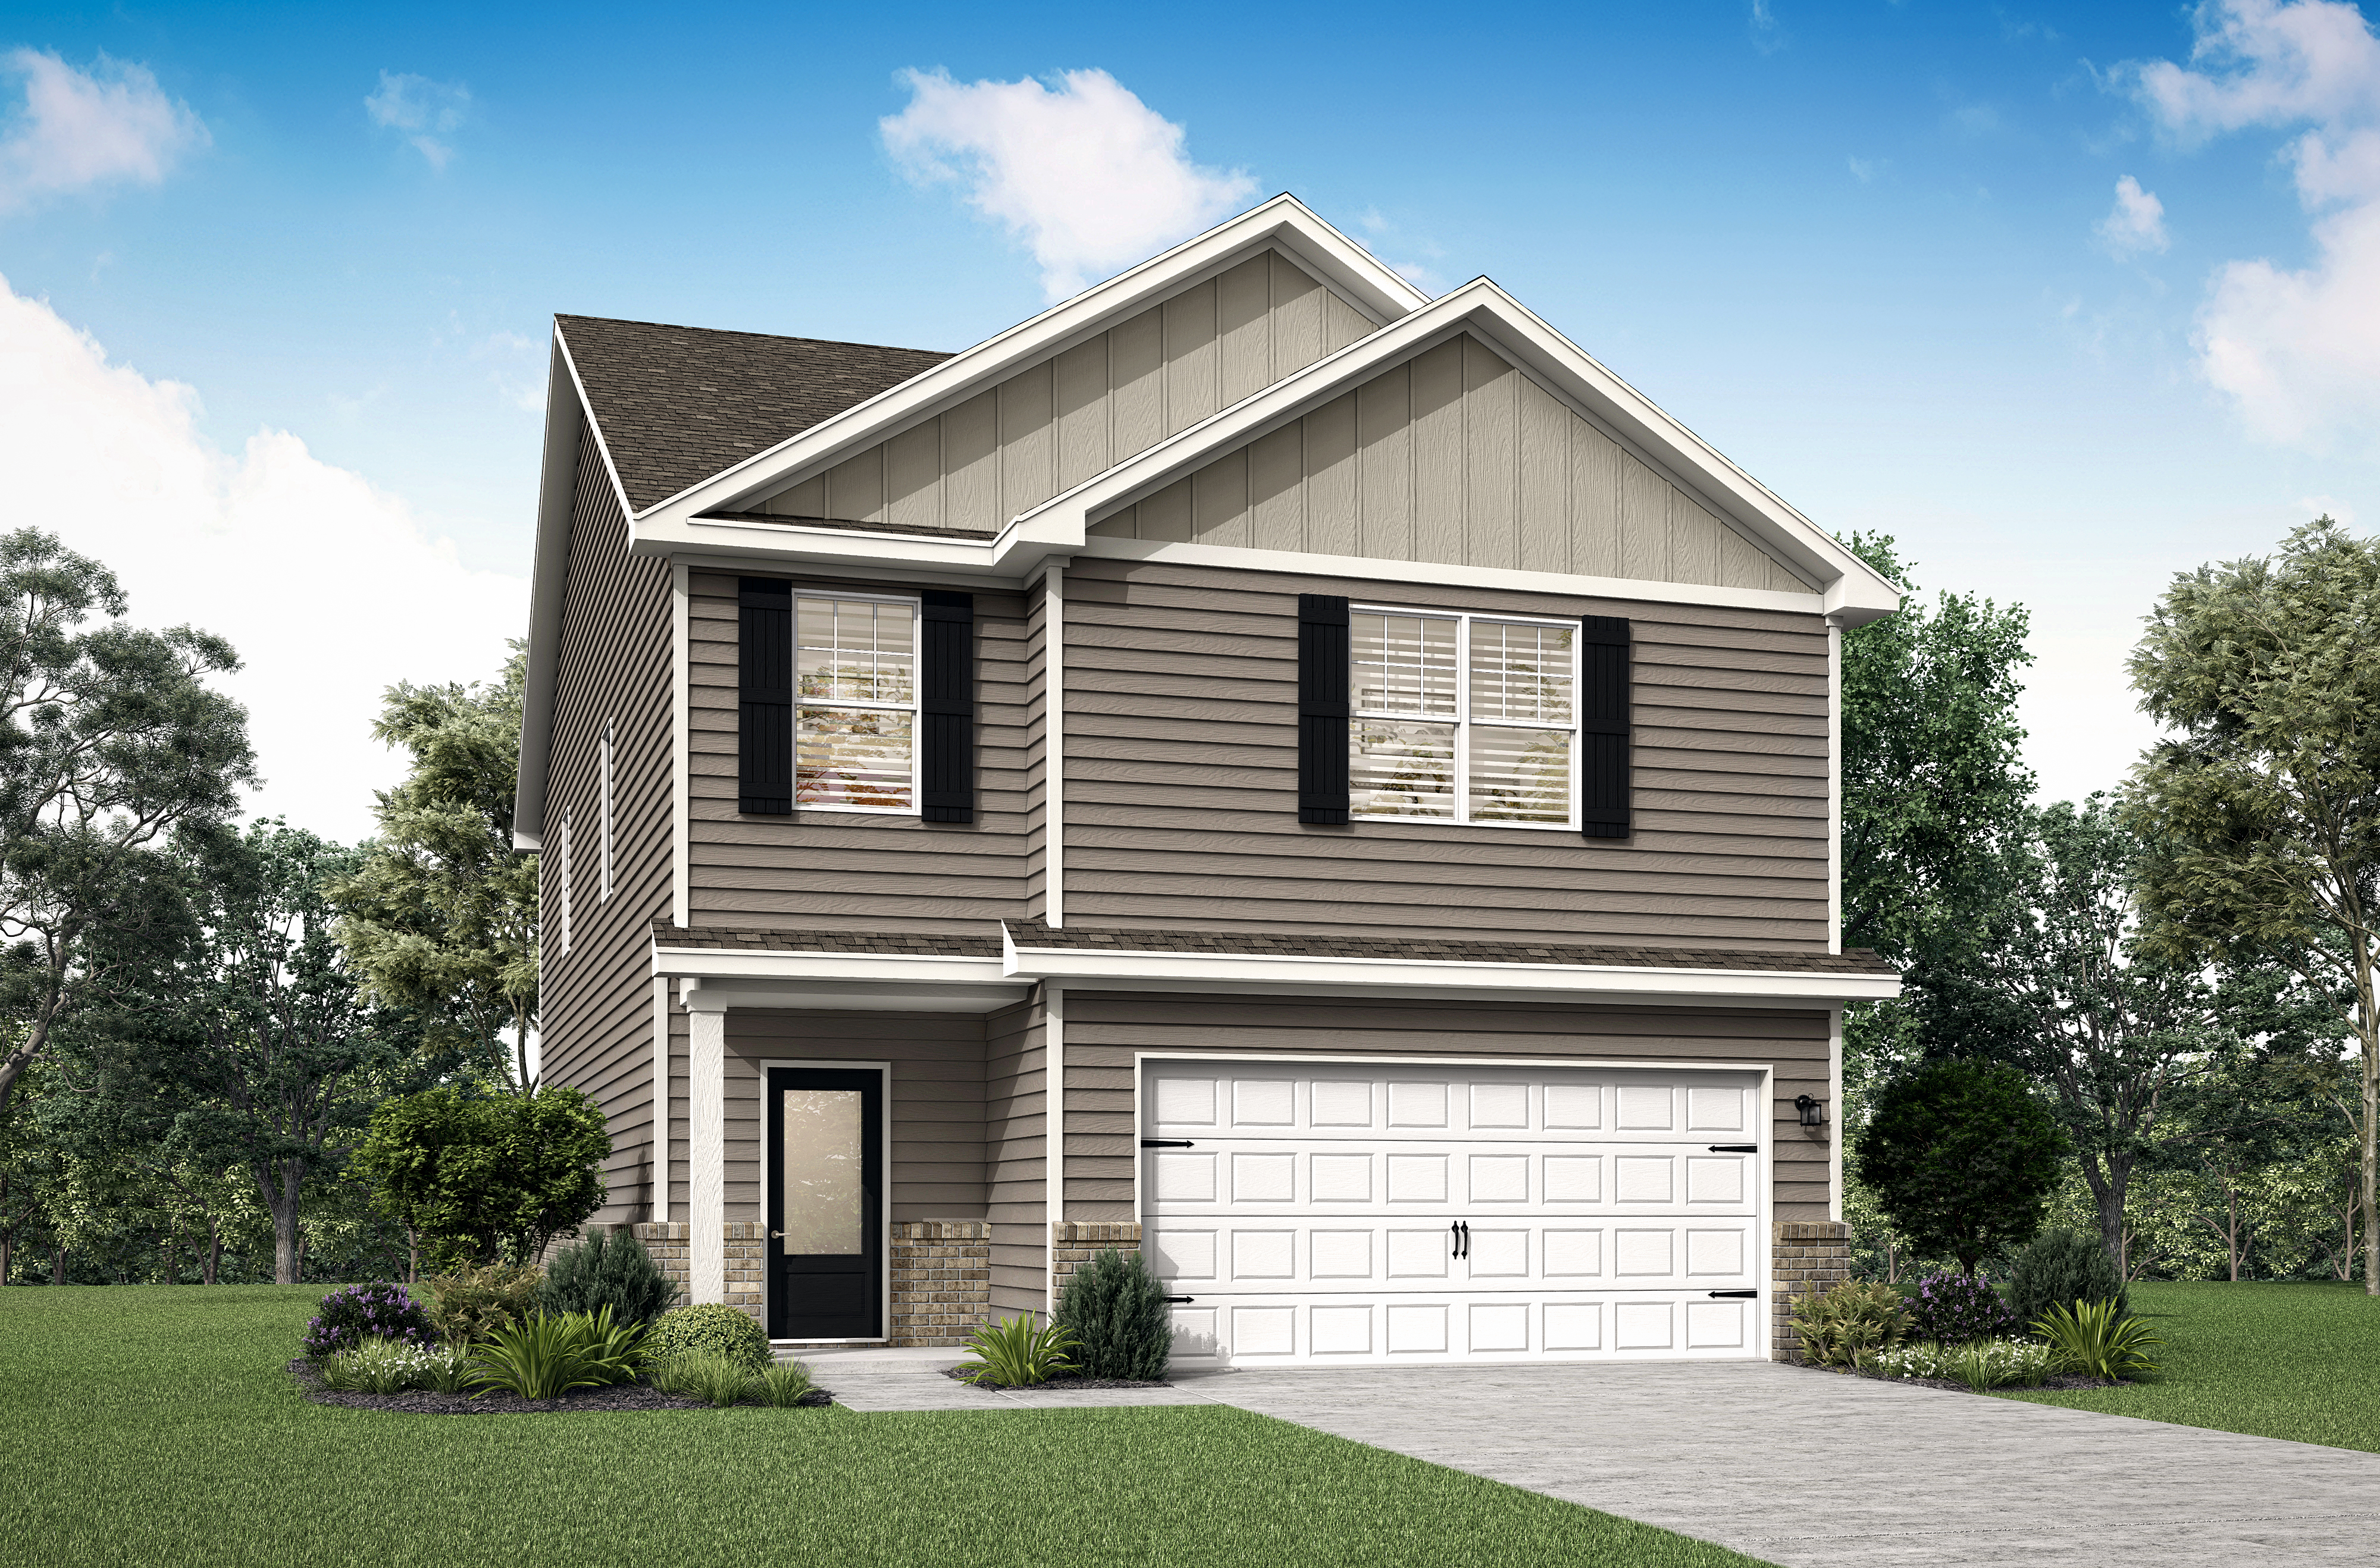 The Lincoln Plan by LGI Homes at Avondale North features four bedrooms, two and a half bathrooms and a game room.